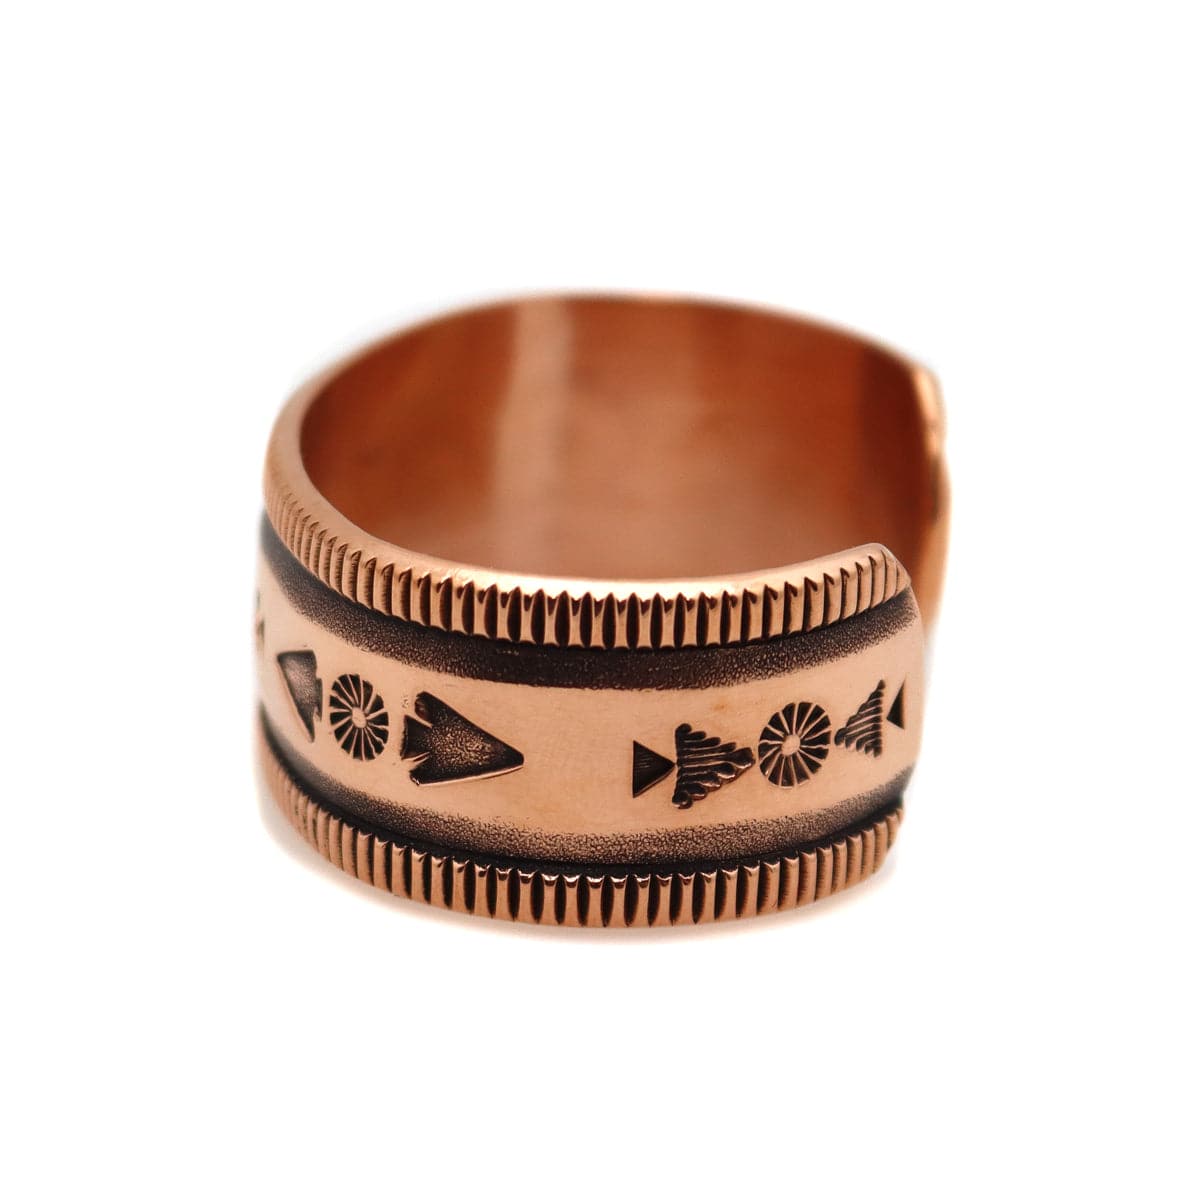 Kee Nataani - Navajo Contemporary Copper Bracelet with Stamped Design, size 5.5 (J13322)2
